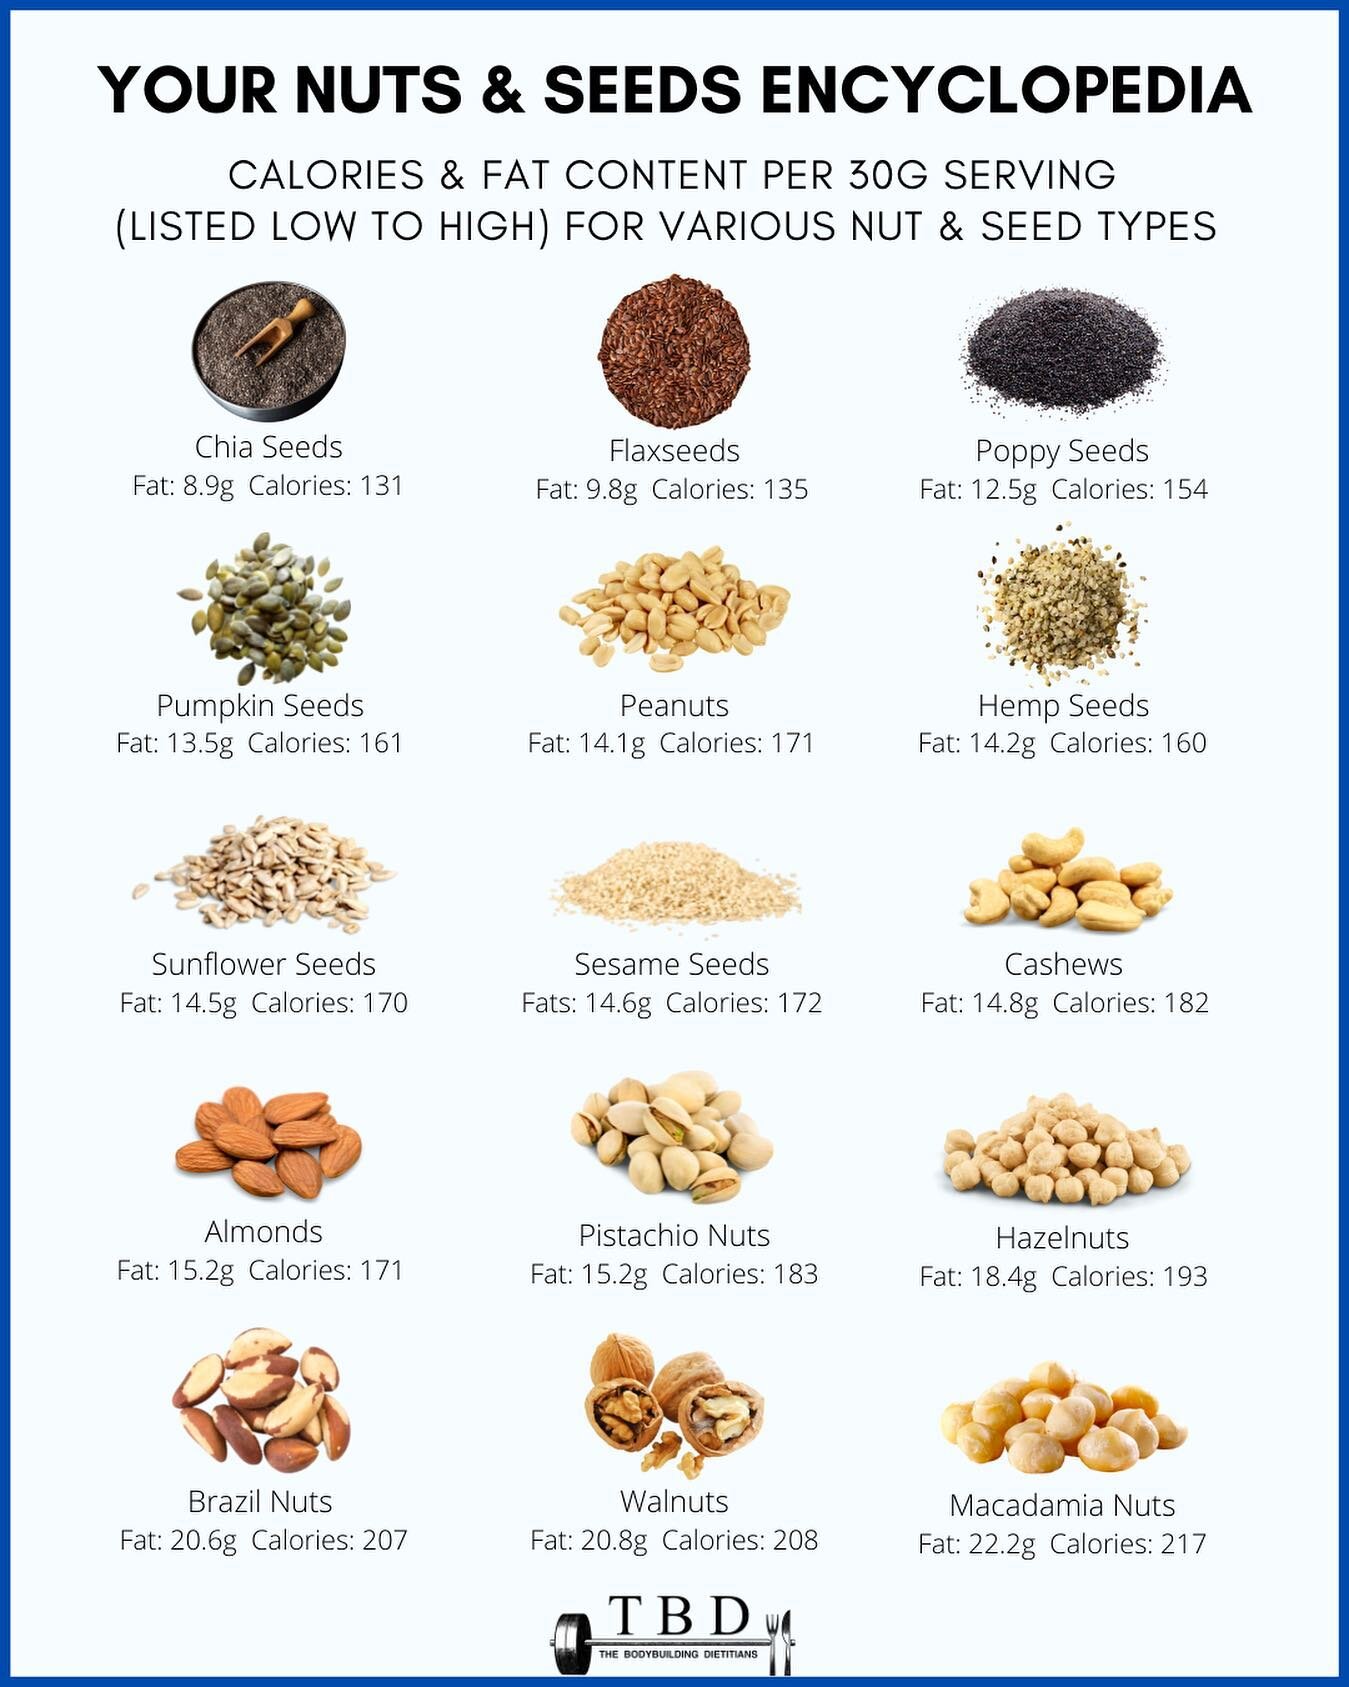 A regular consumption of nuts and seeds is often associated with low cholesterol levels, a low prevalence of chronic disease, and the maintenance of a healthy weight 🌰&hearts;️✔️

Some could even say that nuts and seeds are Mother Nature's golden nu